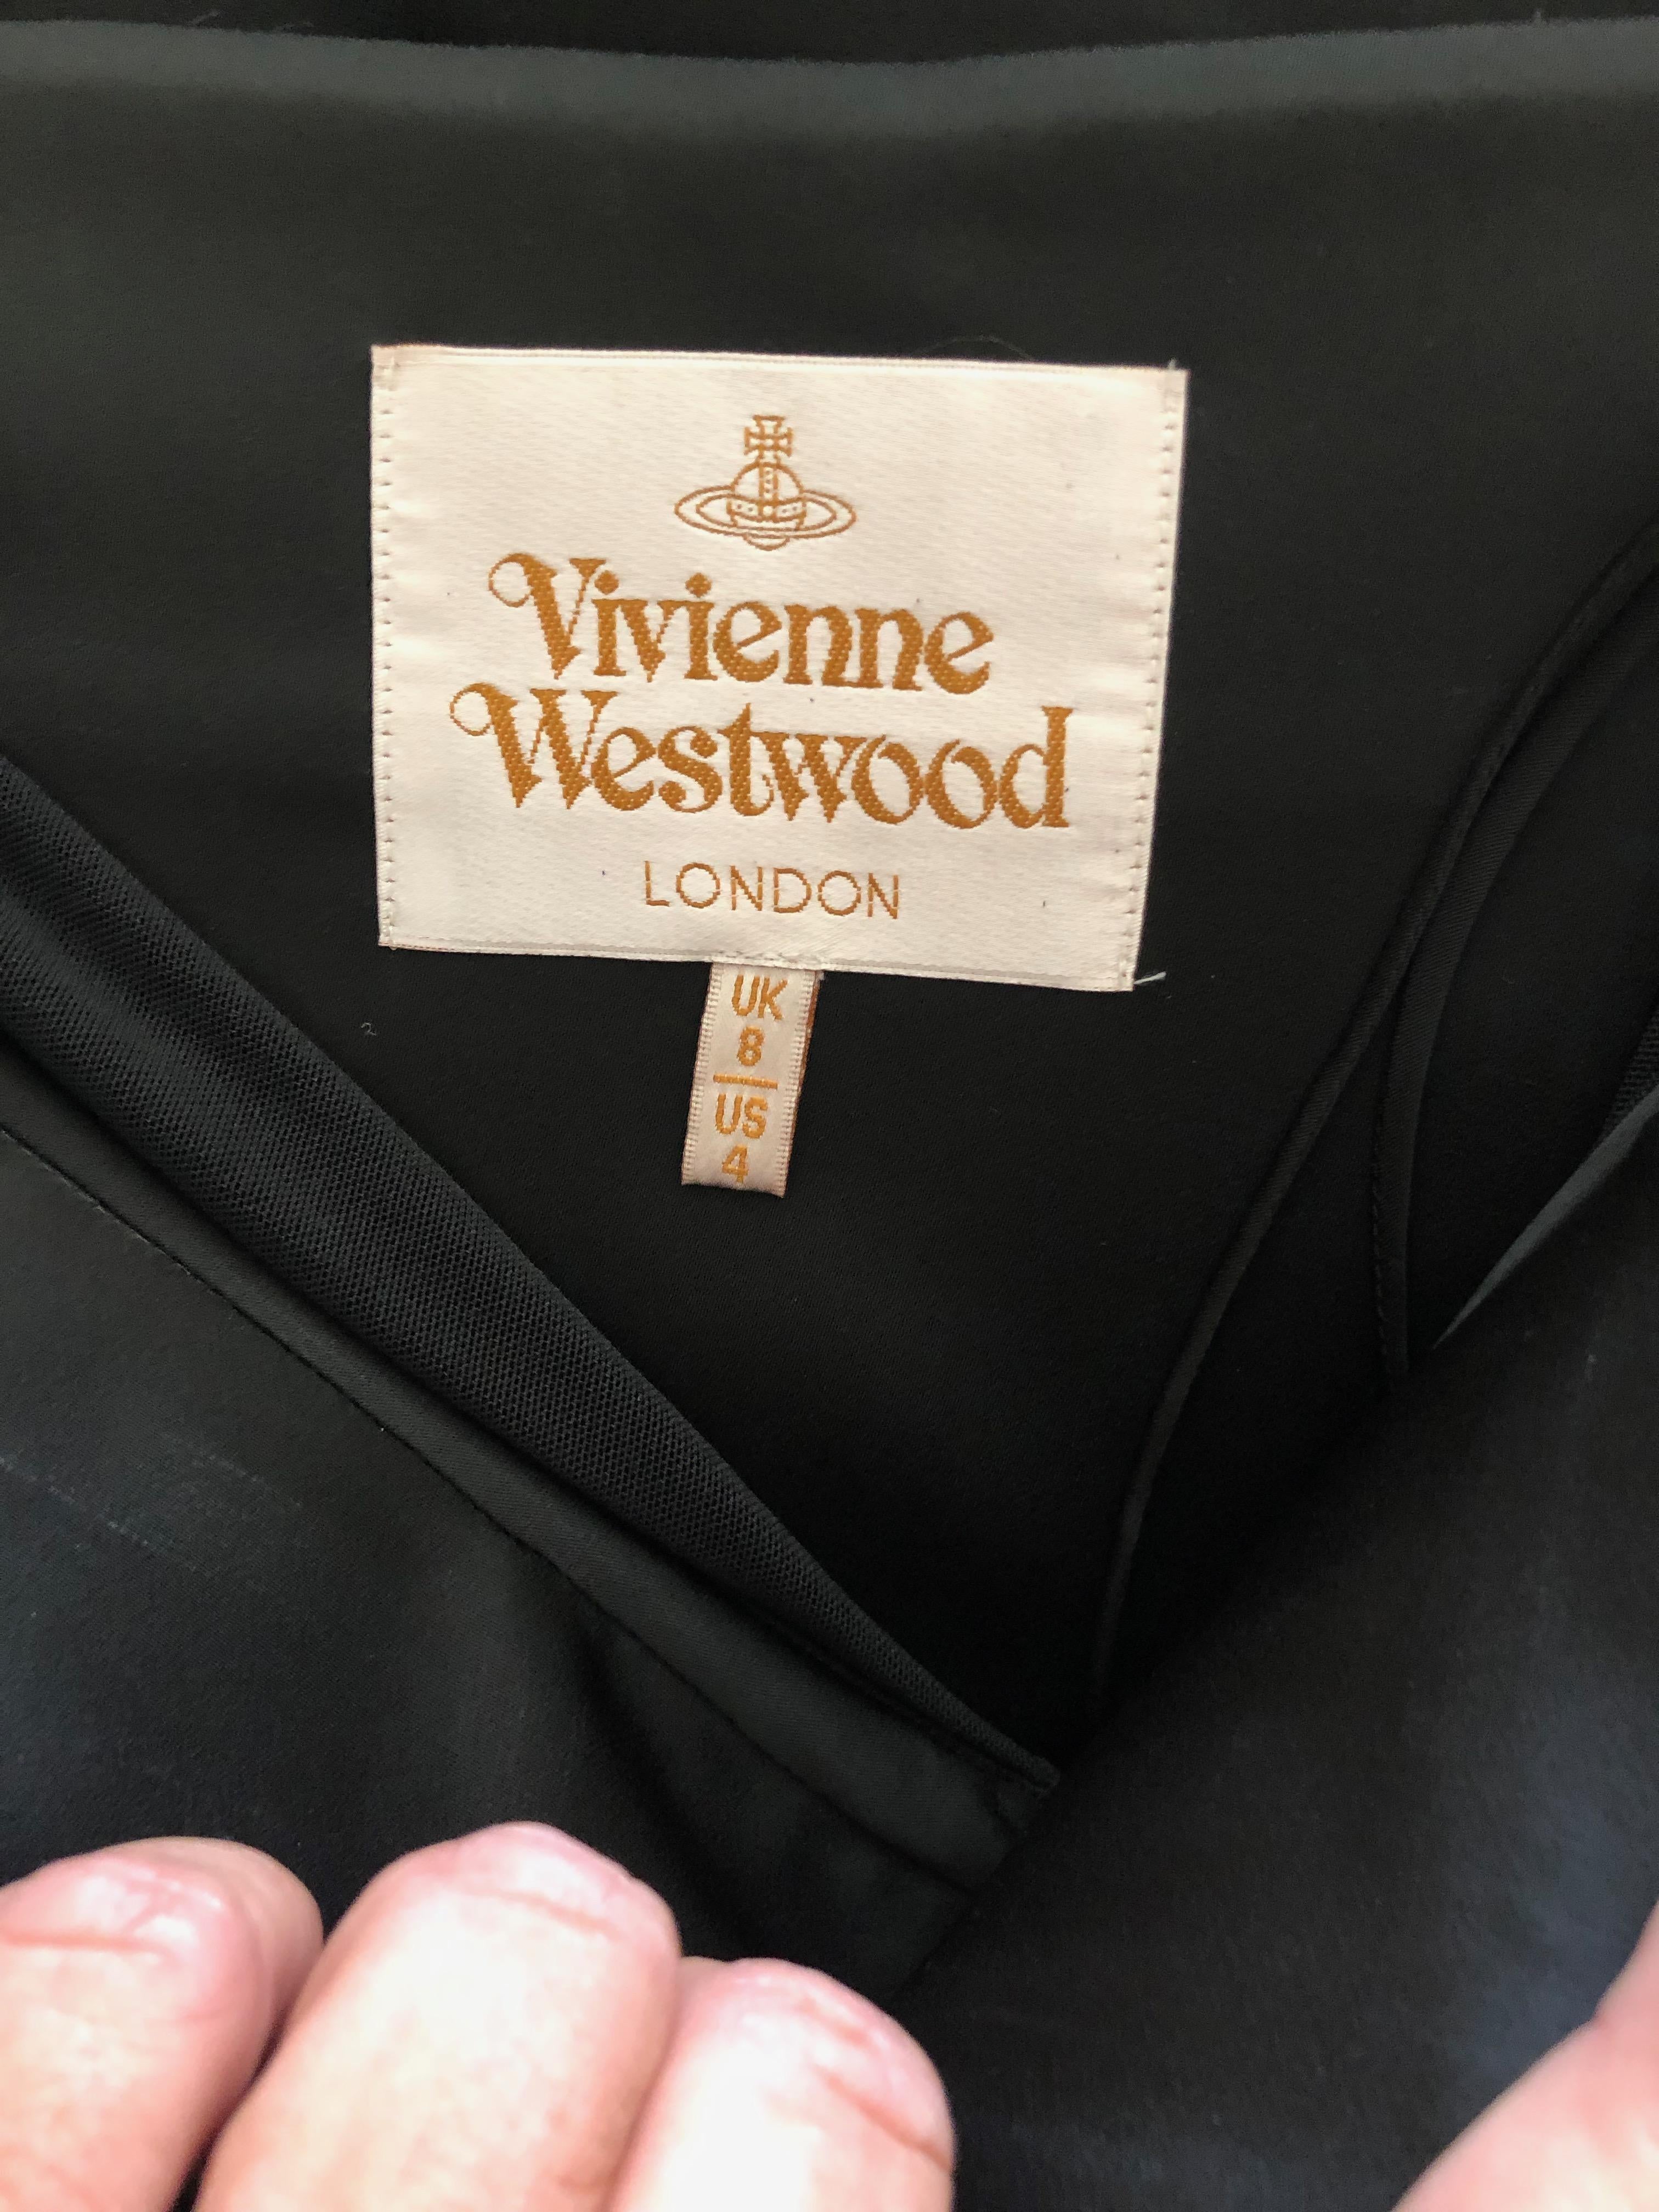 Vivienne Westwood Gold Label  Black Evening Dress with Built In Corset. 
 Built in corset, a Westwood signature.
I'm not certain I styled it right
There is a lot of stretch in the corset, the measurements are given without stretching.
 Size 8 UK, 4